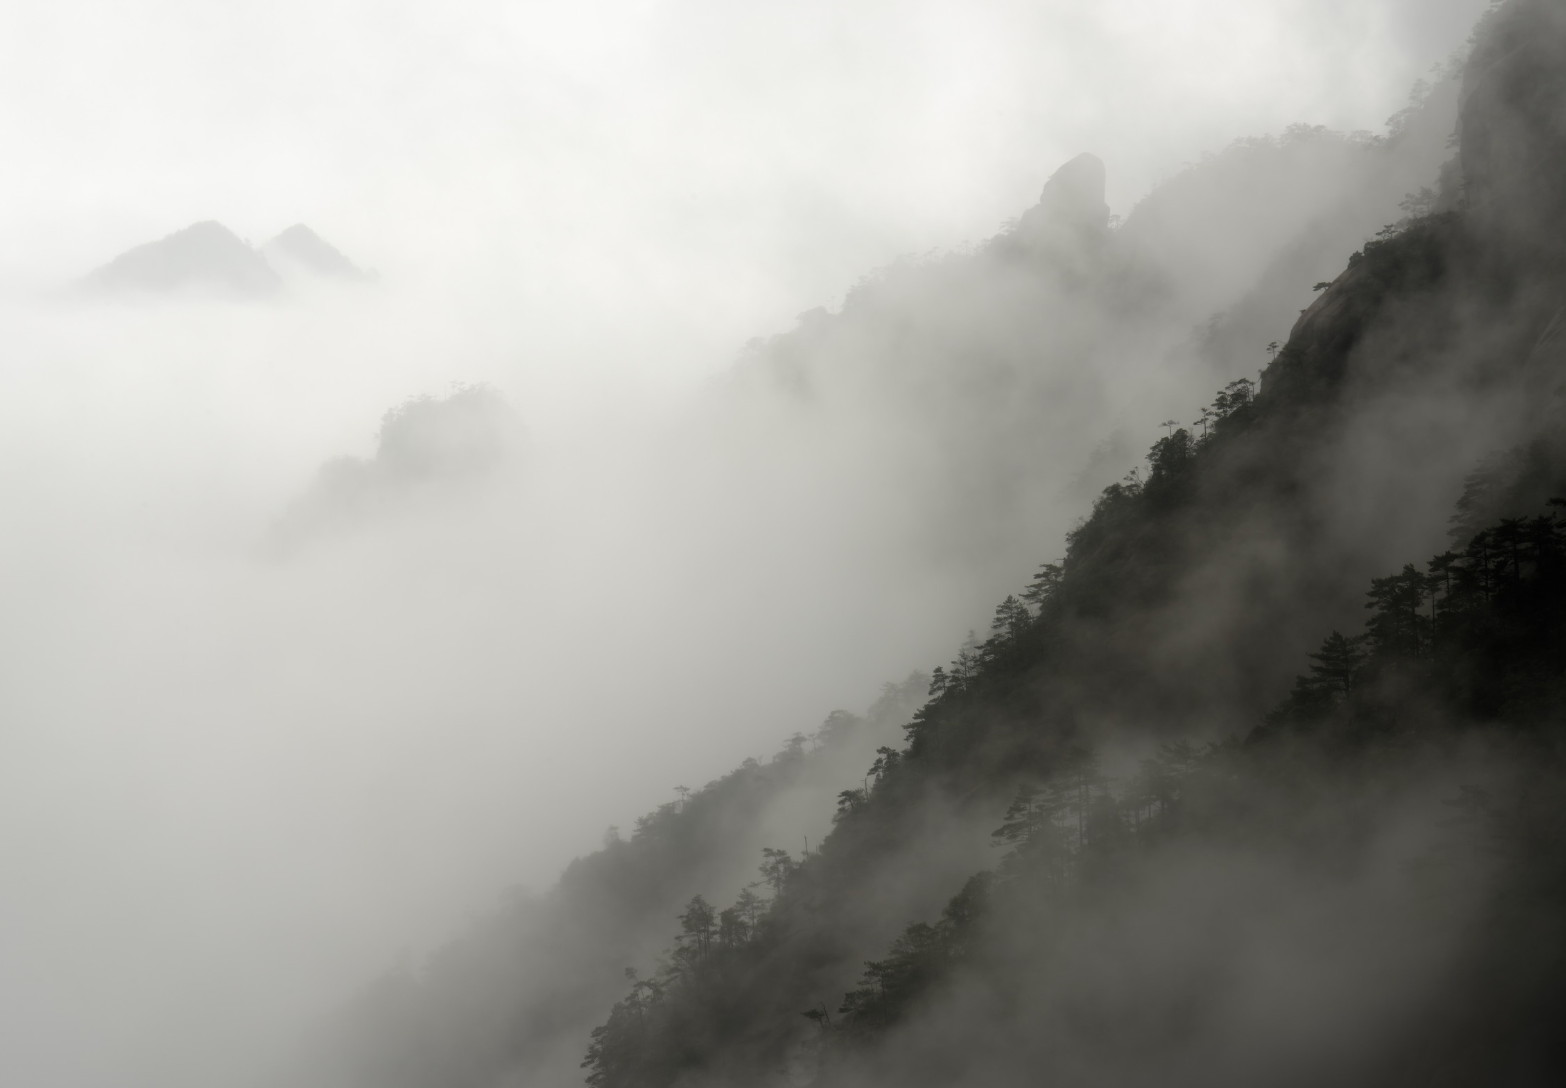 mountains shrouded in mist, creating a serene and atmospheric scene